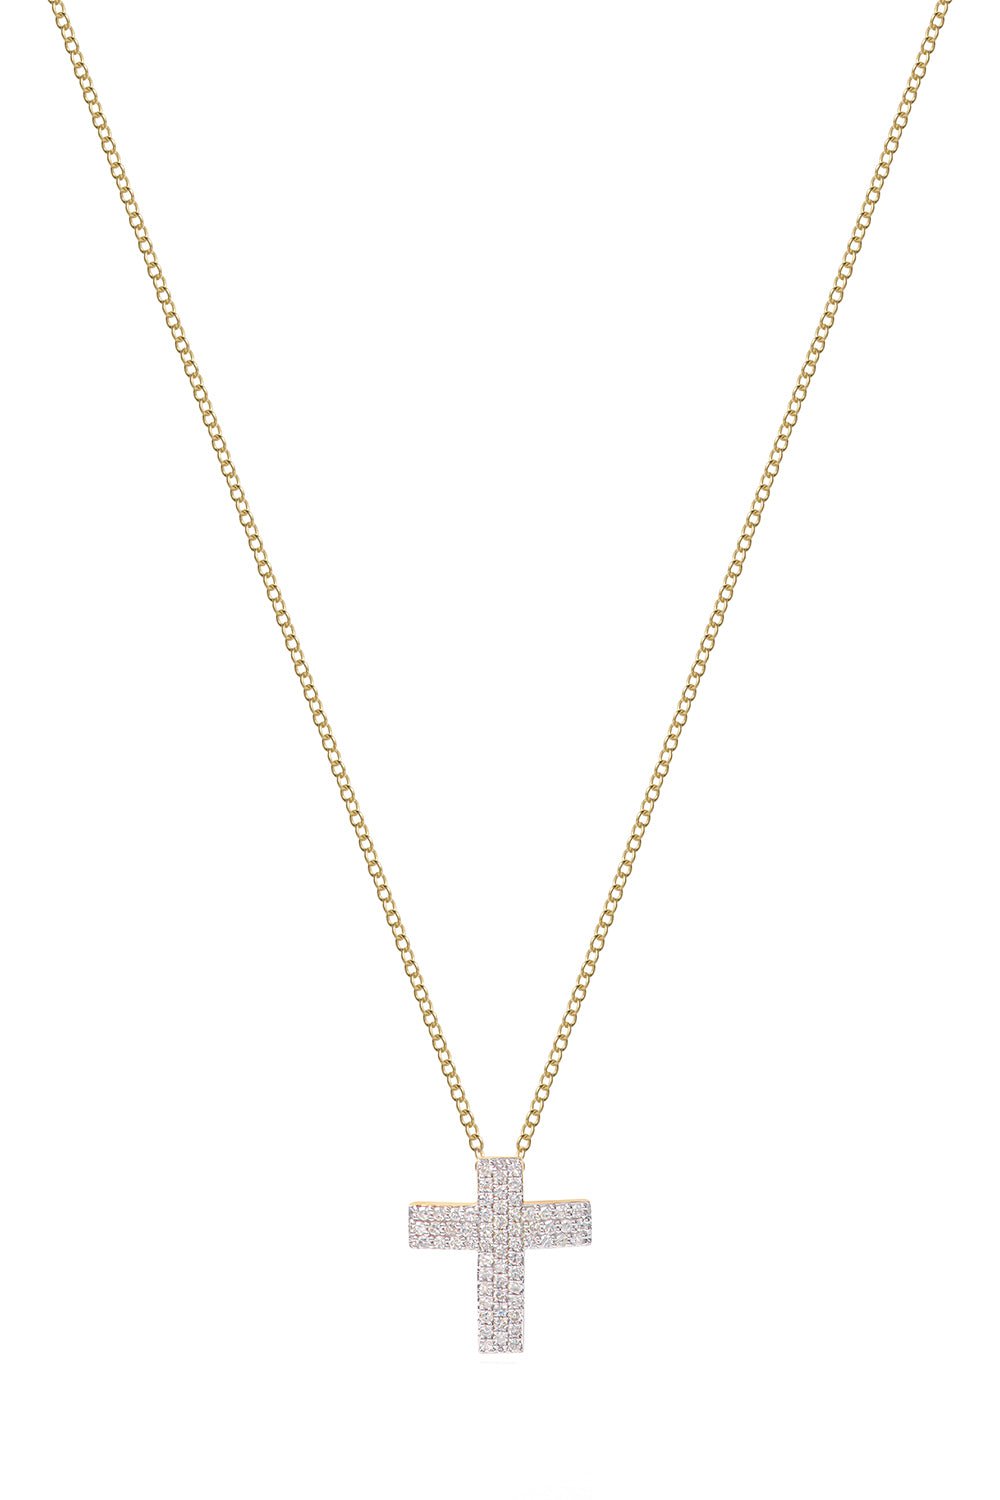 PHILLIPS HOUSE-Infinity Cross Necklace-YELLOW GOLD